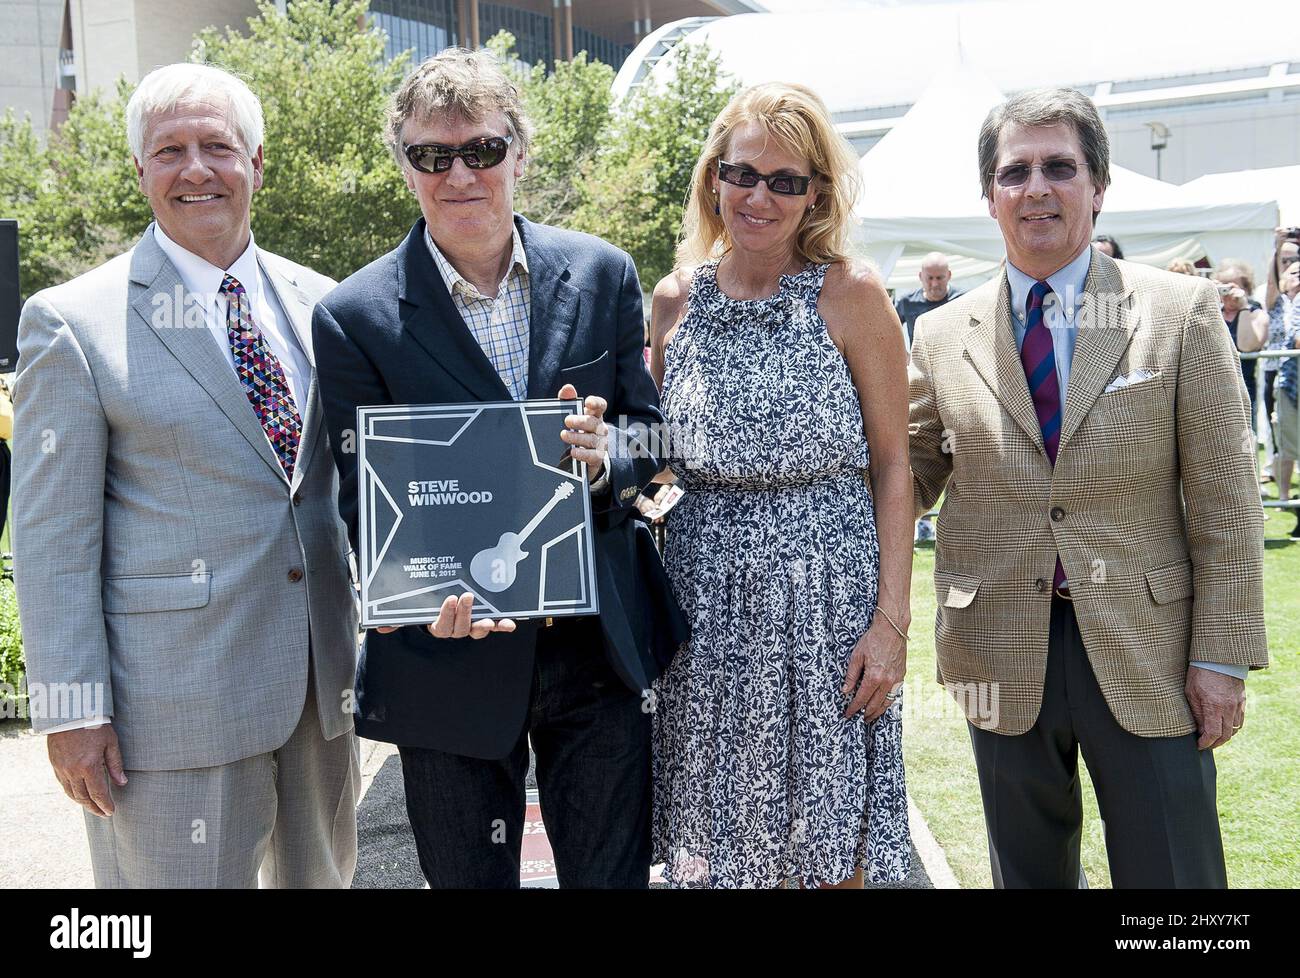 Steve Winwood, Eugenia Winwood, Dr. Bob Fisher, Marc Stengel as Steve Winwood is honoured at the 2012 Music City Walk of Fame Induction Ceremony in Nashville, USA. Stock Photo